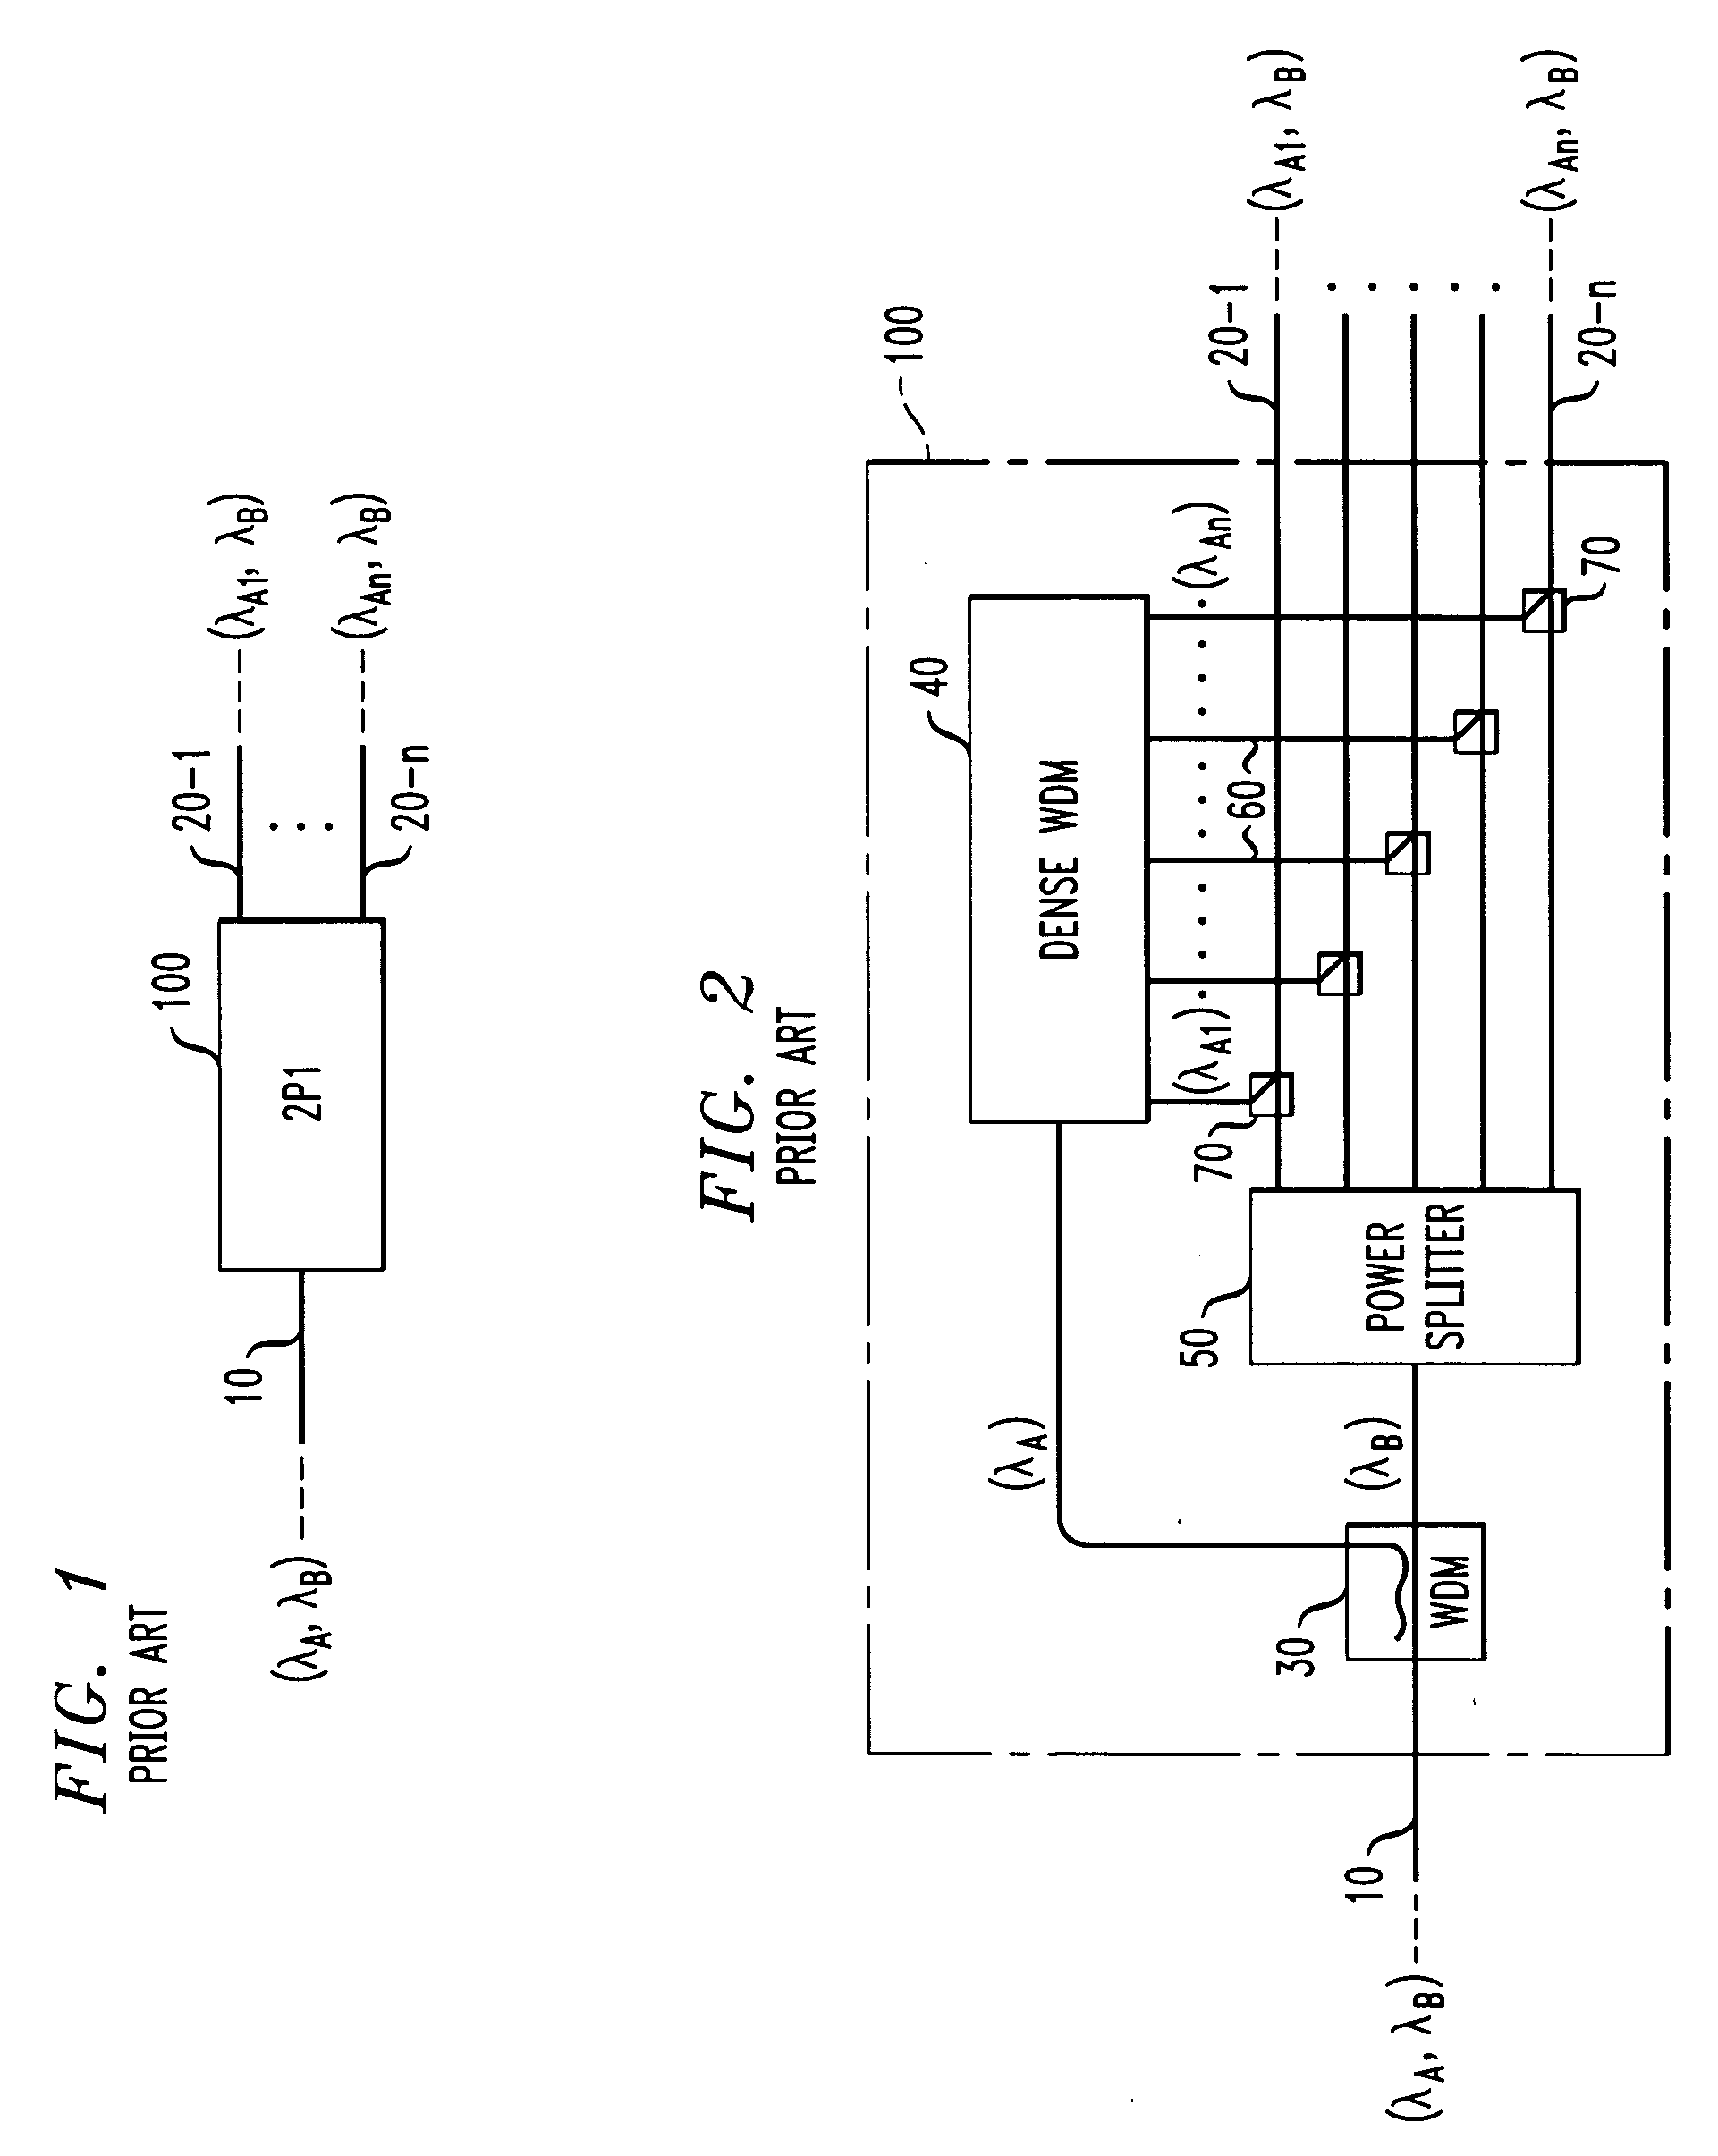 Method and apparatus for increasing downstream bandwidth of a passive optical network using integrated WDM/power spitting devices and tunable lasers